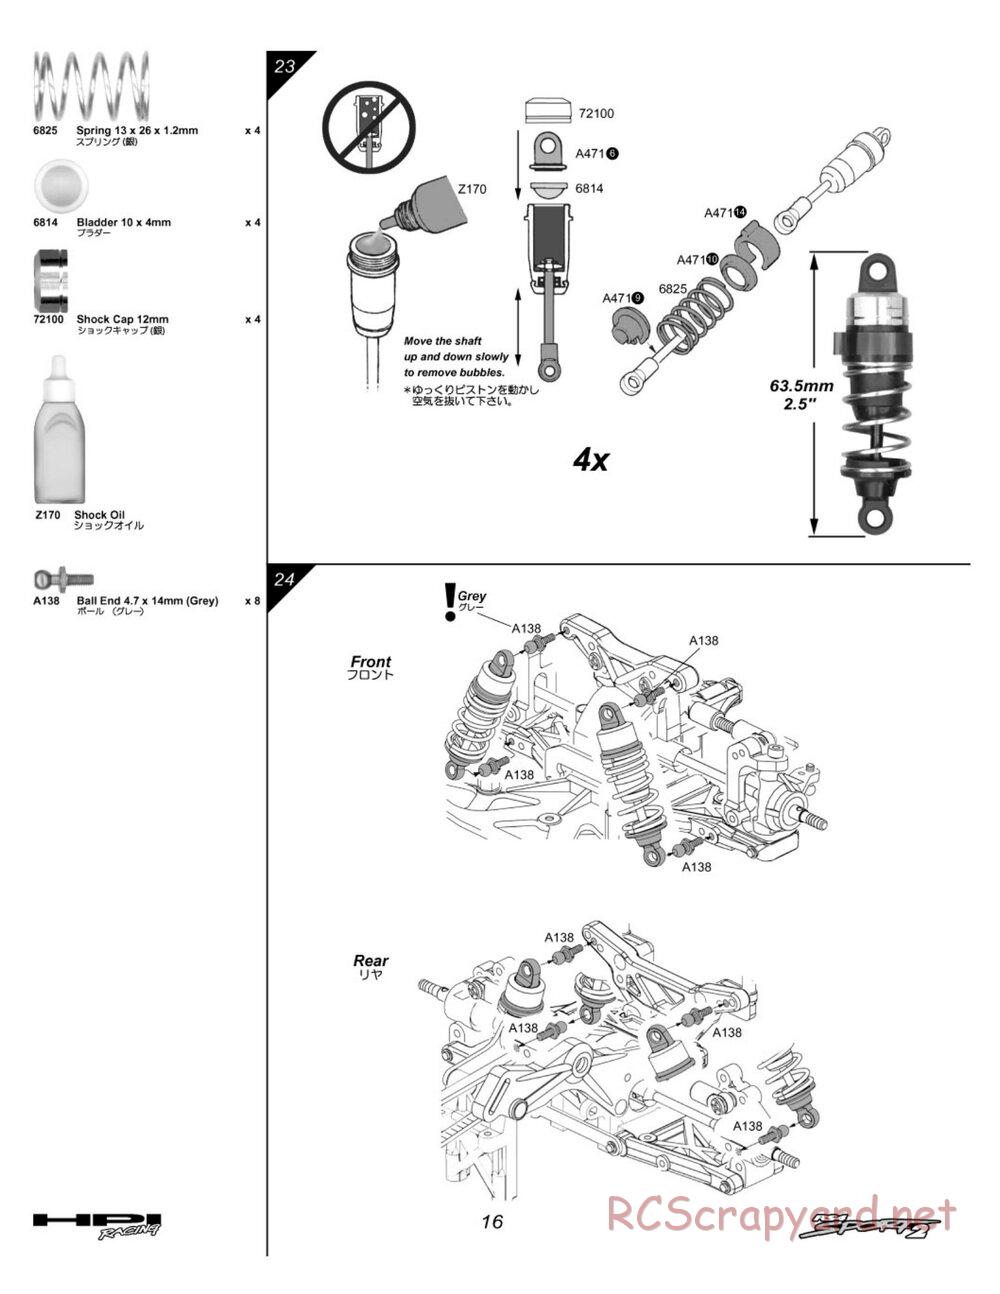 HPI - RS4 Sport 2 - Manual - Page 16